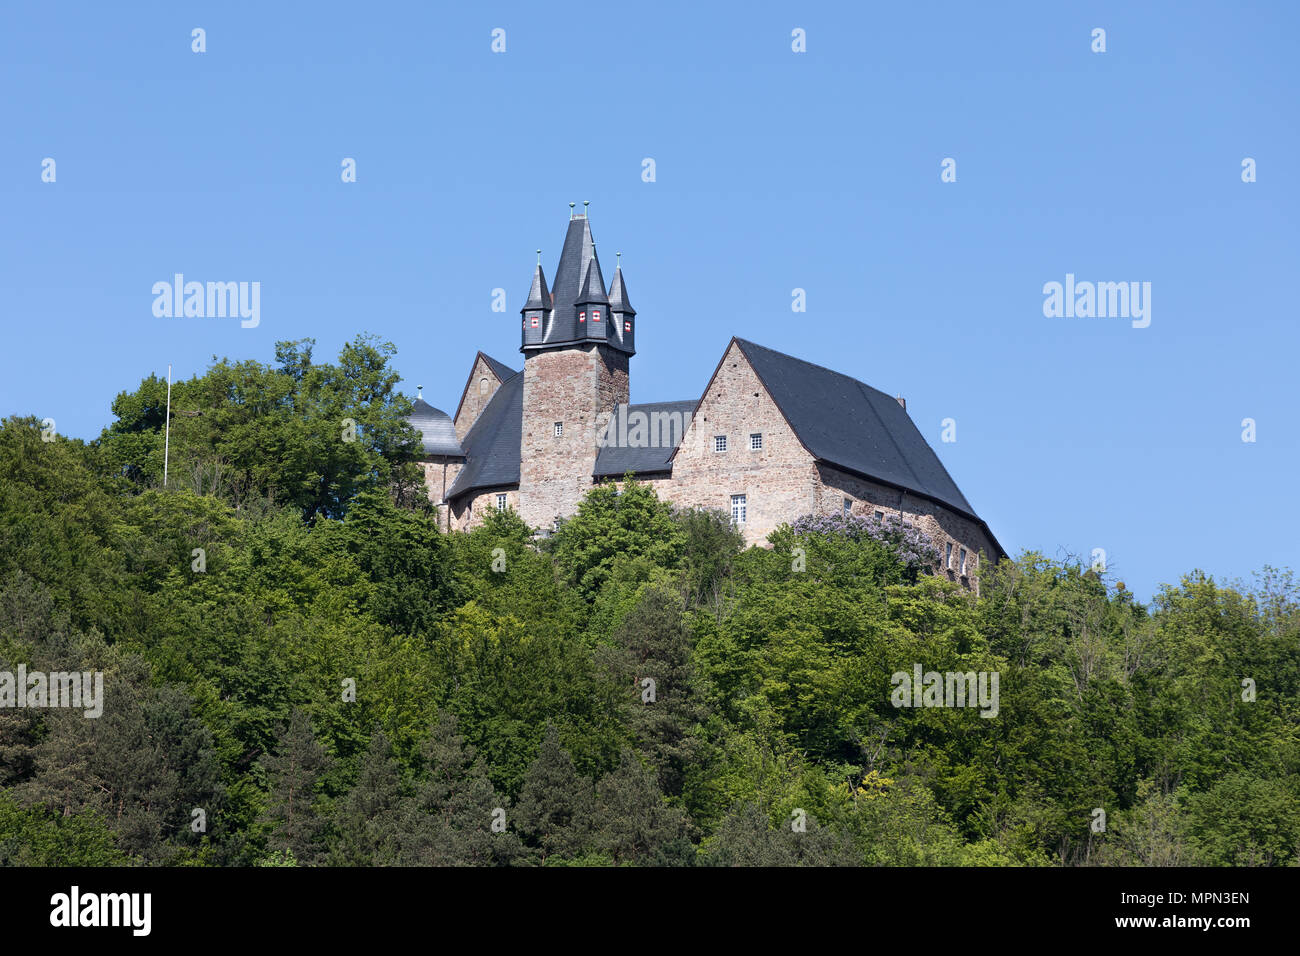 Castle Spangenberg on wooded hill Stock Photo